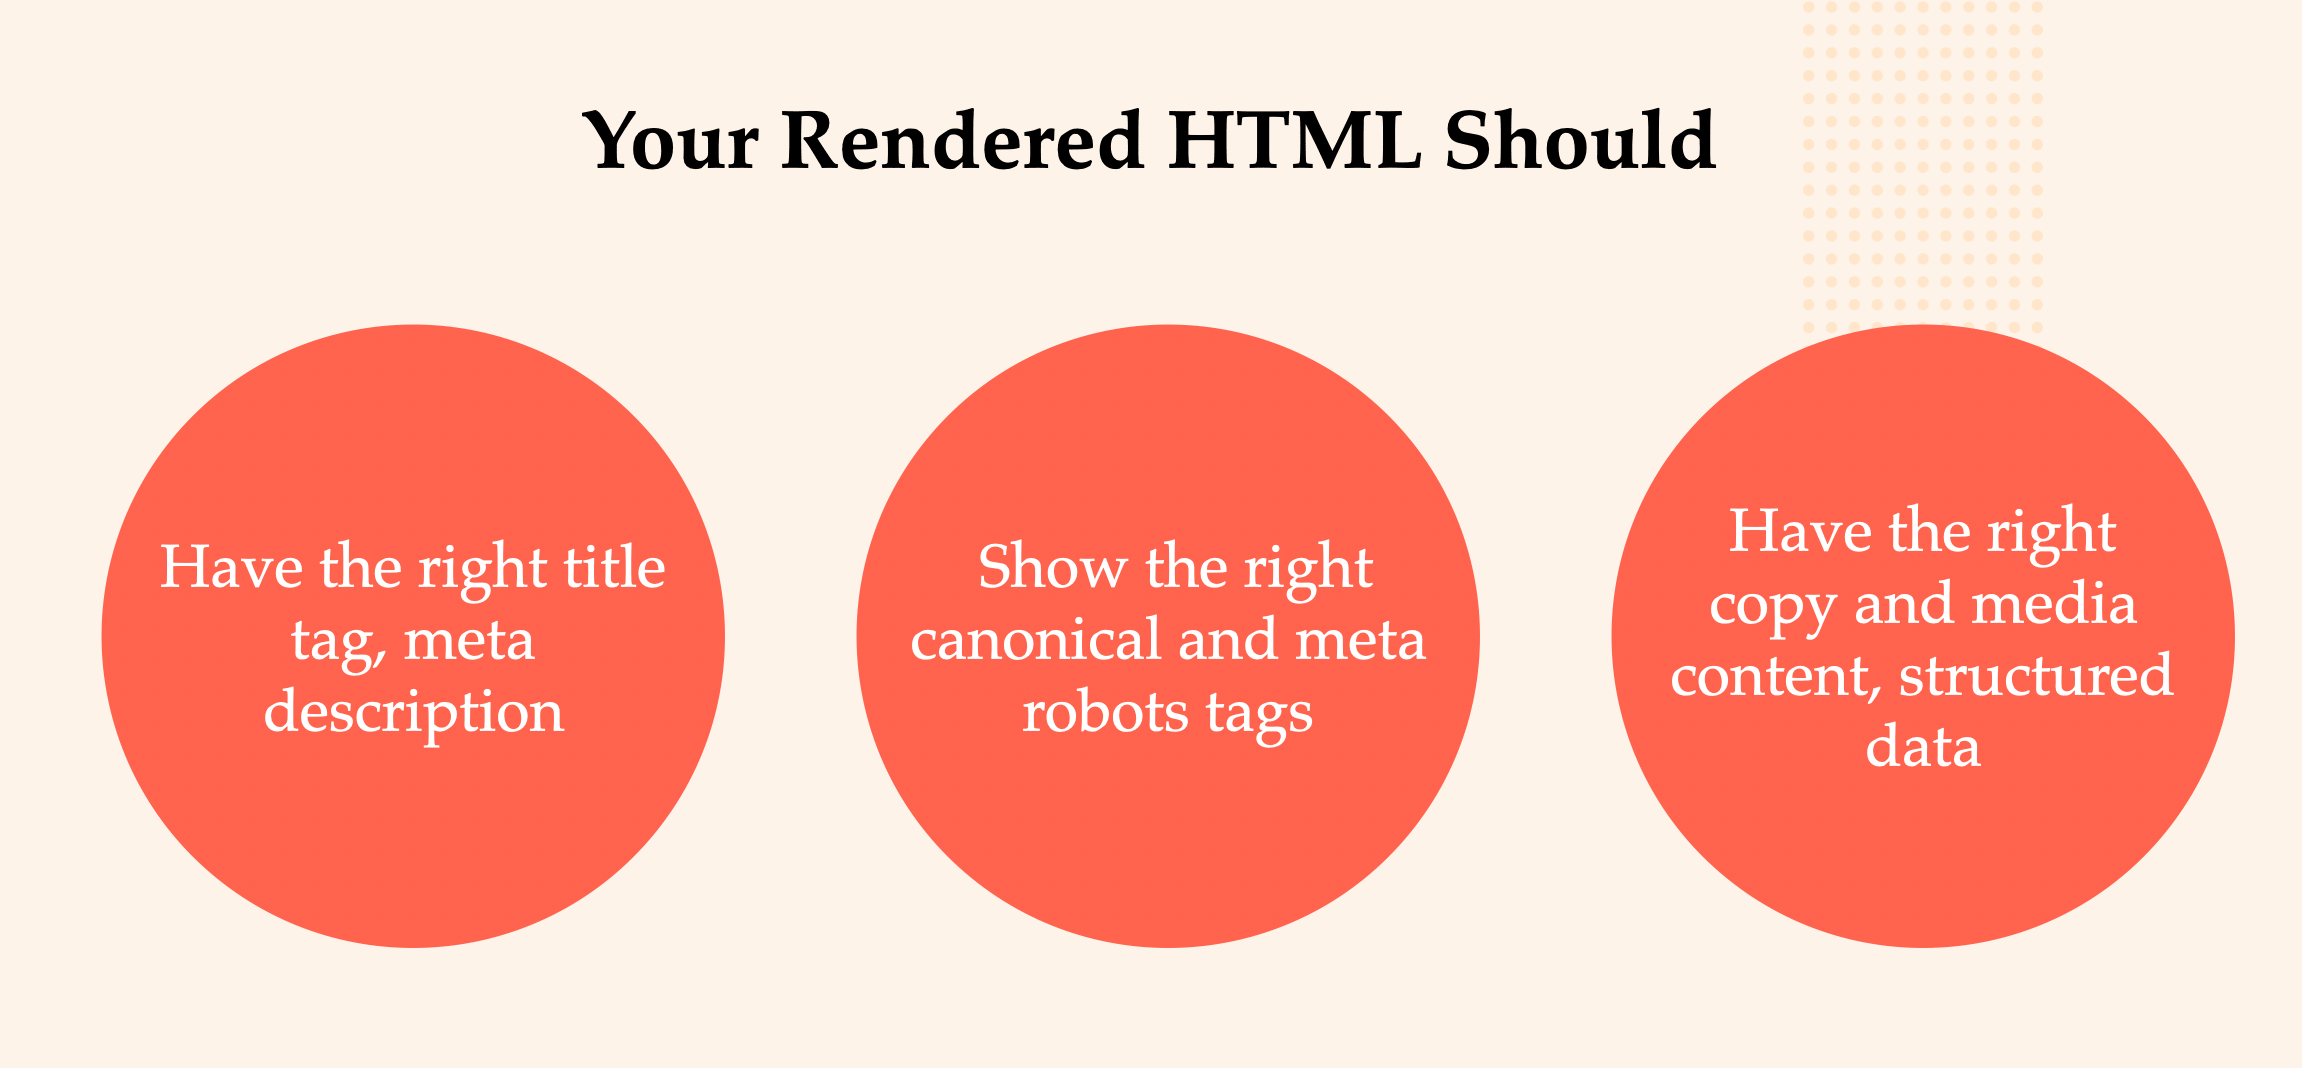 You need to make sure that rendered HTML shows the right information.